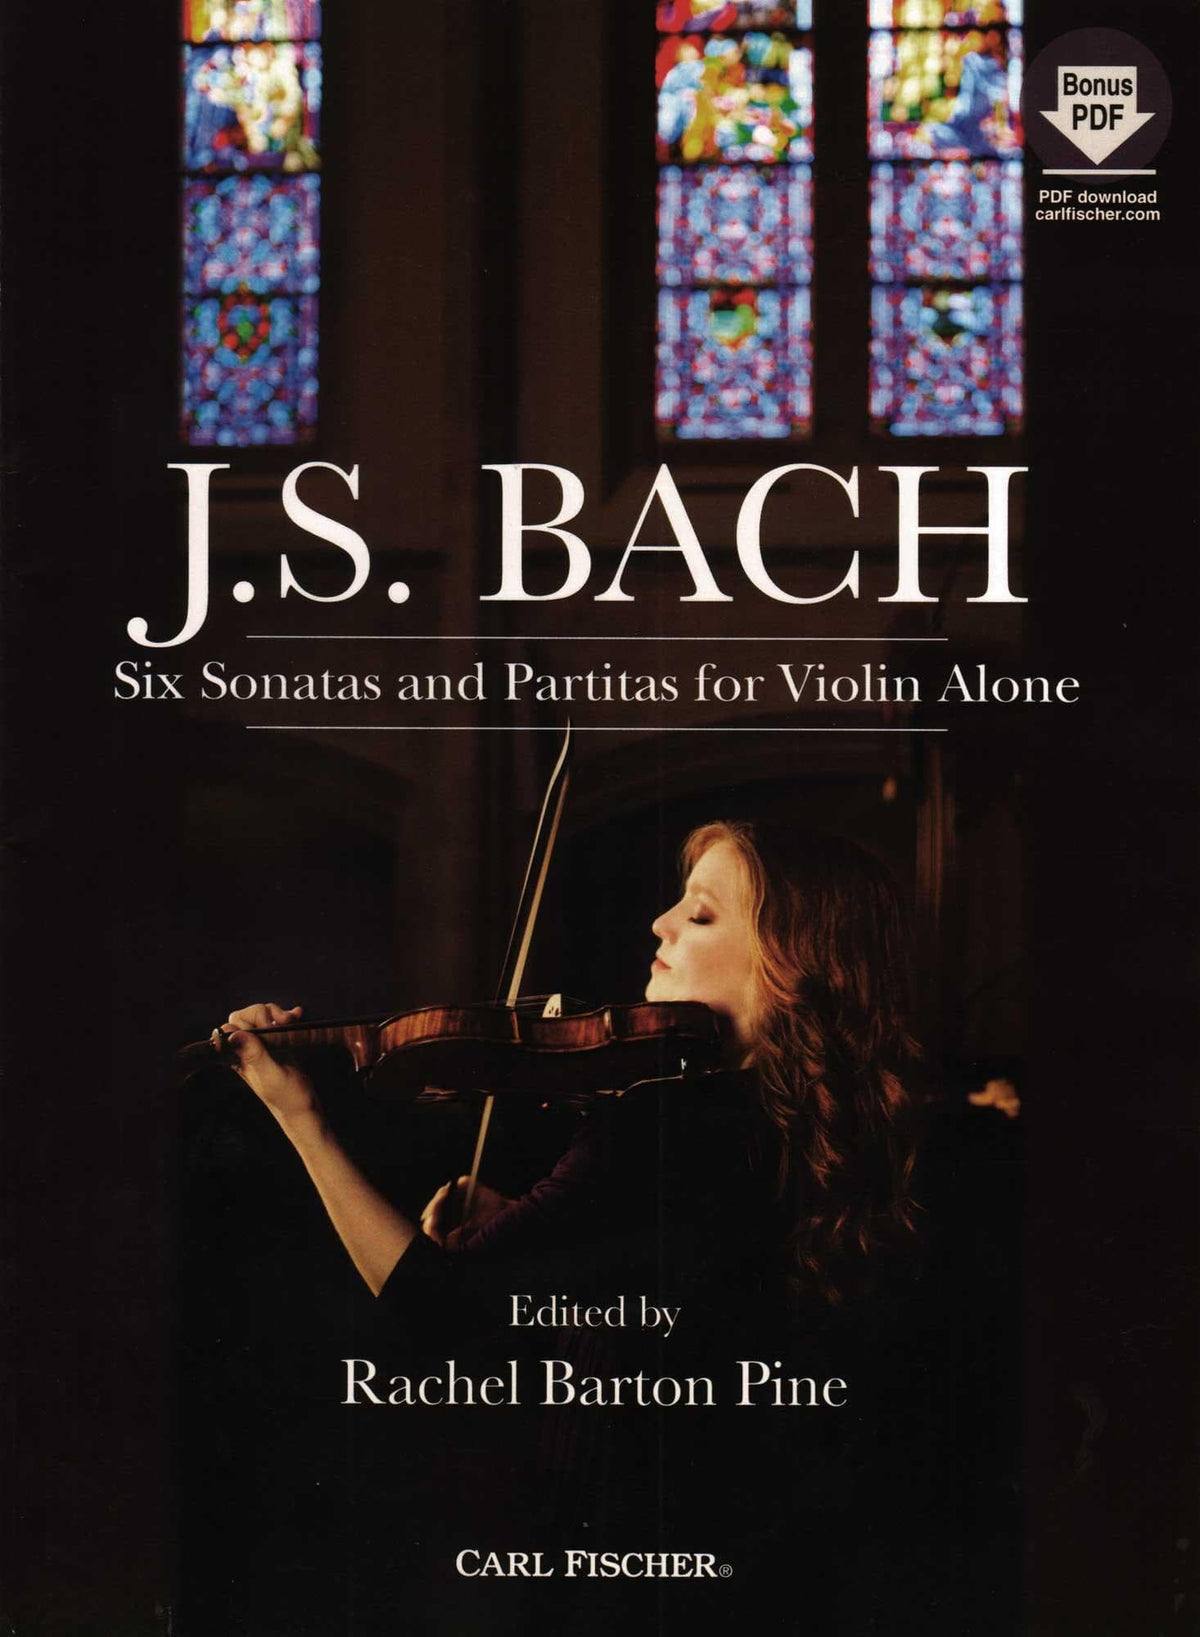 Bach, J.S. - Six Sonatas and Partitas for Violin Alone - Edited by Rachel Barton Pine - Carl Fischer